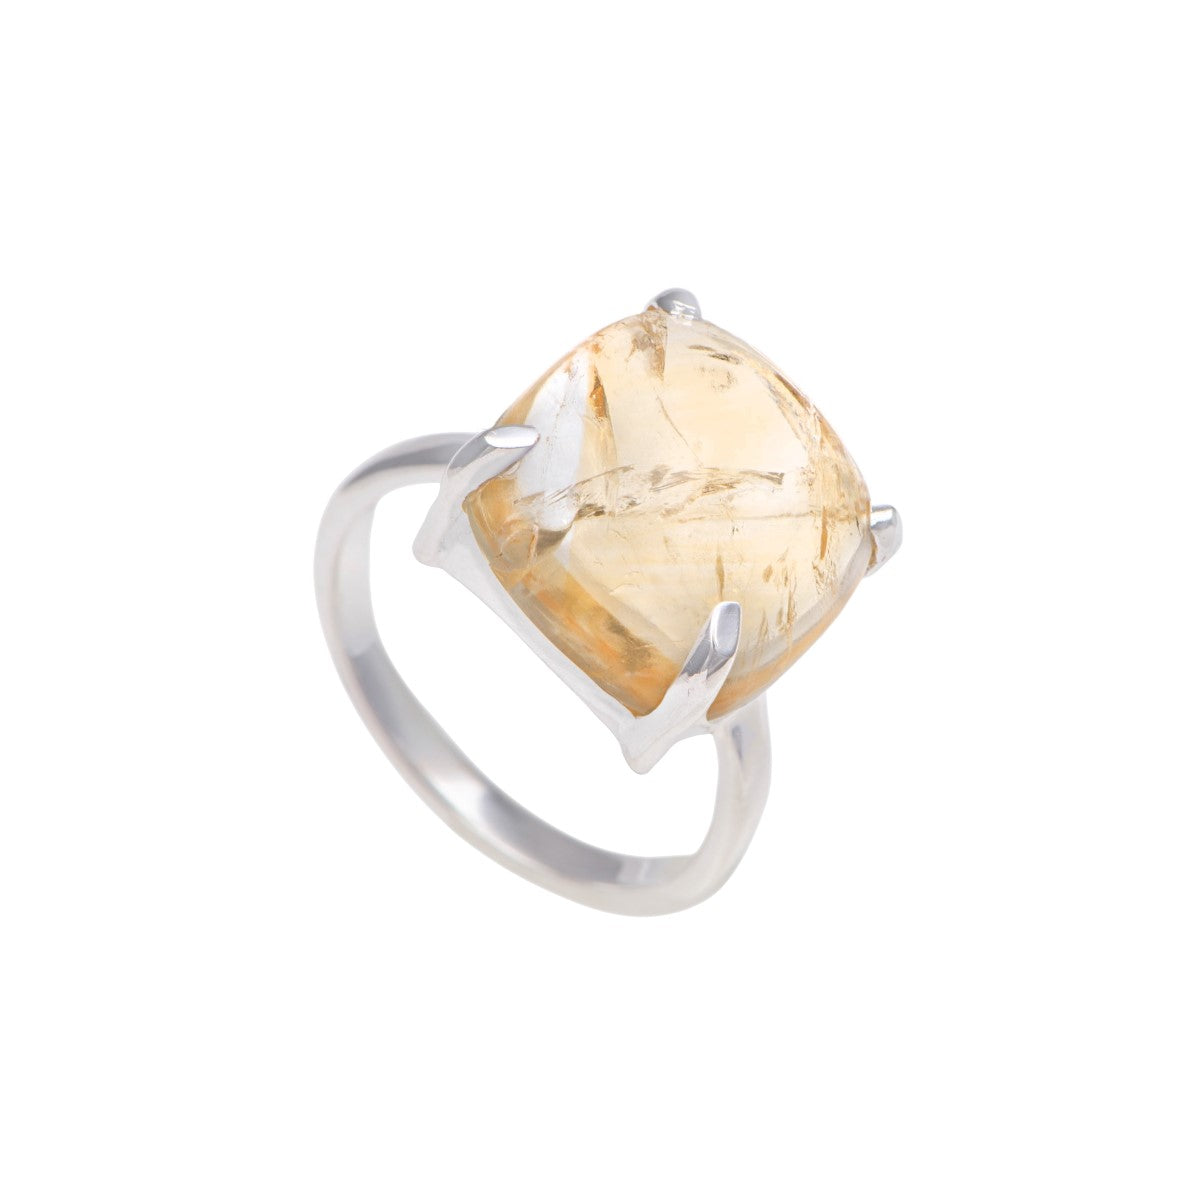 Square Cabochon Citrine Ring in Sterling Silver